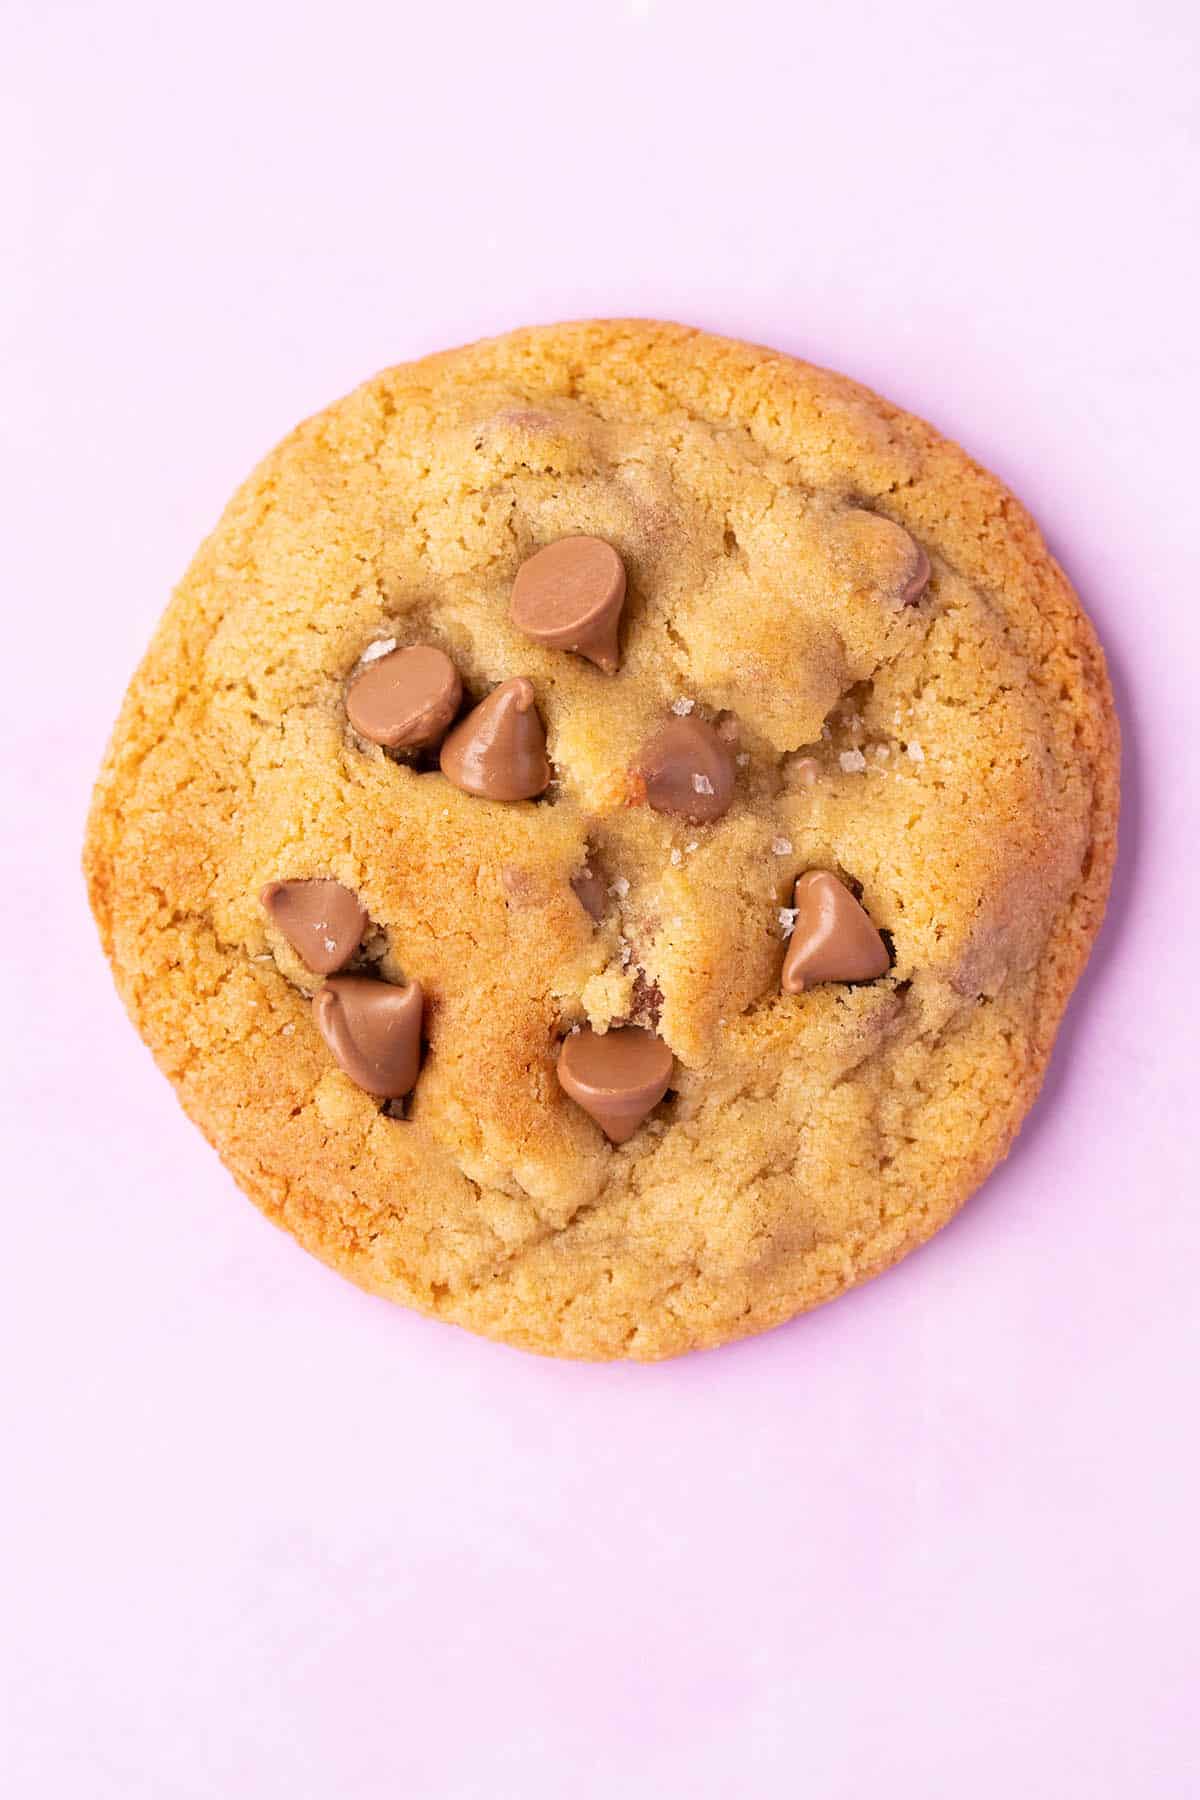 Top view of a golden chocolate chip cookie on a purple background.